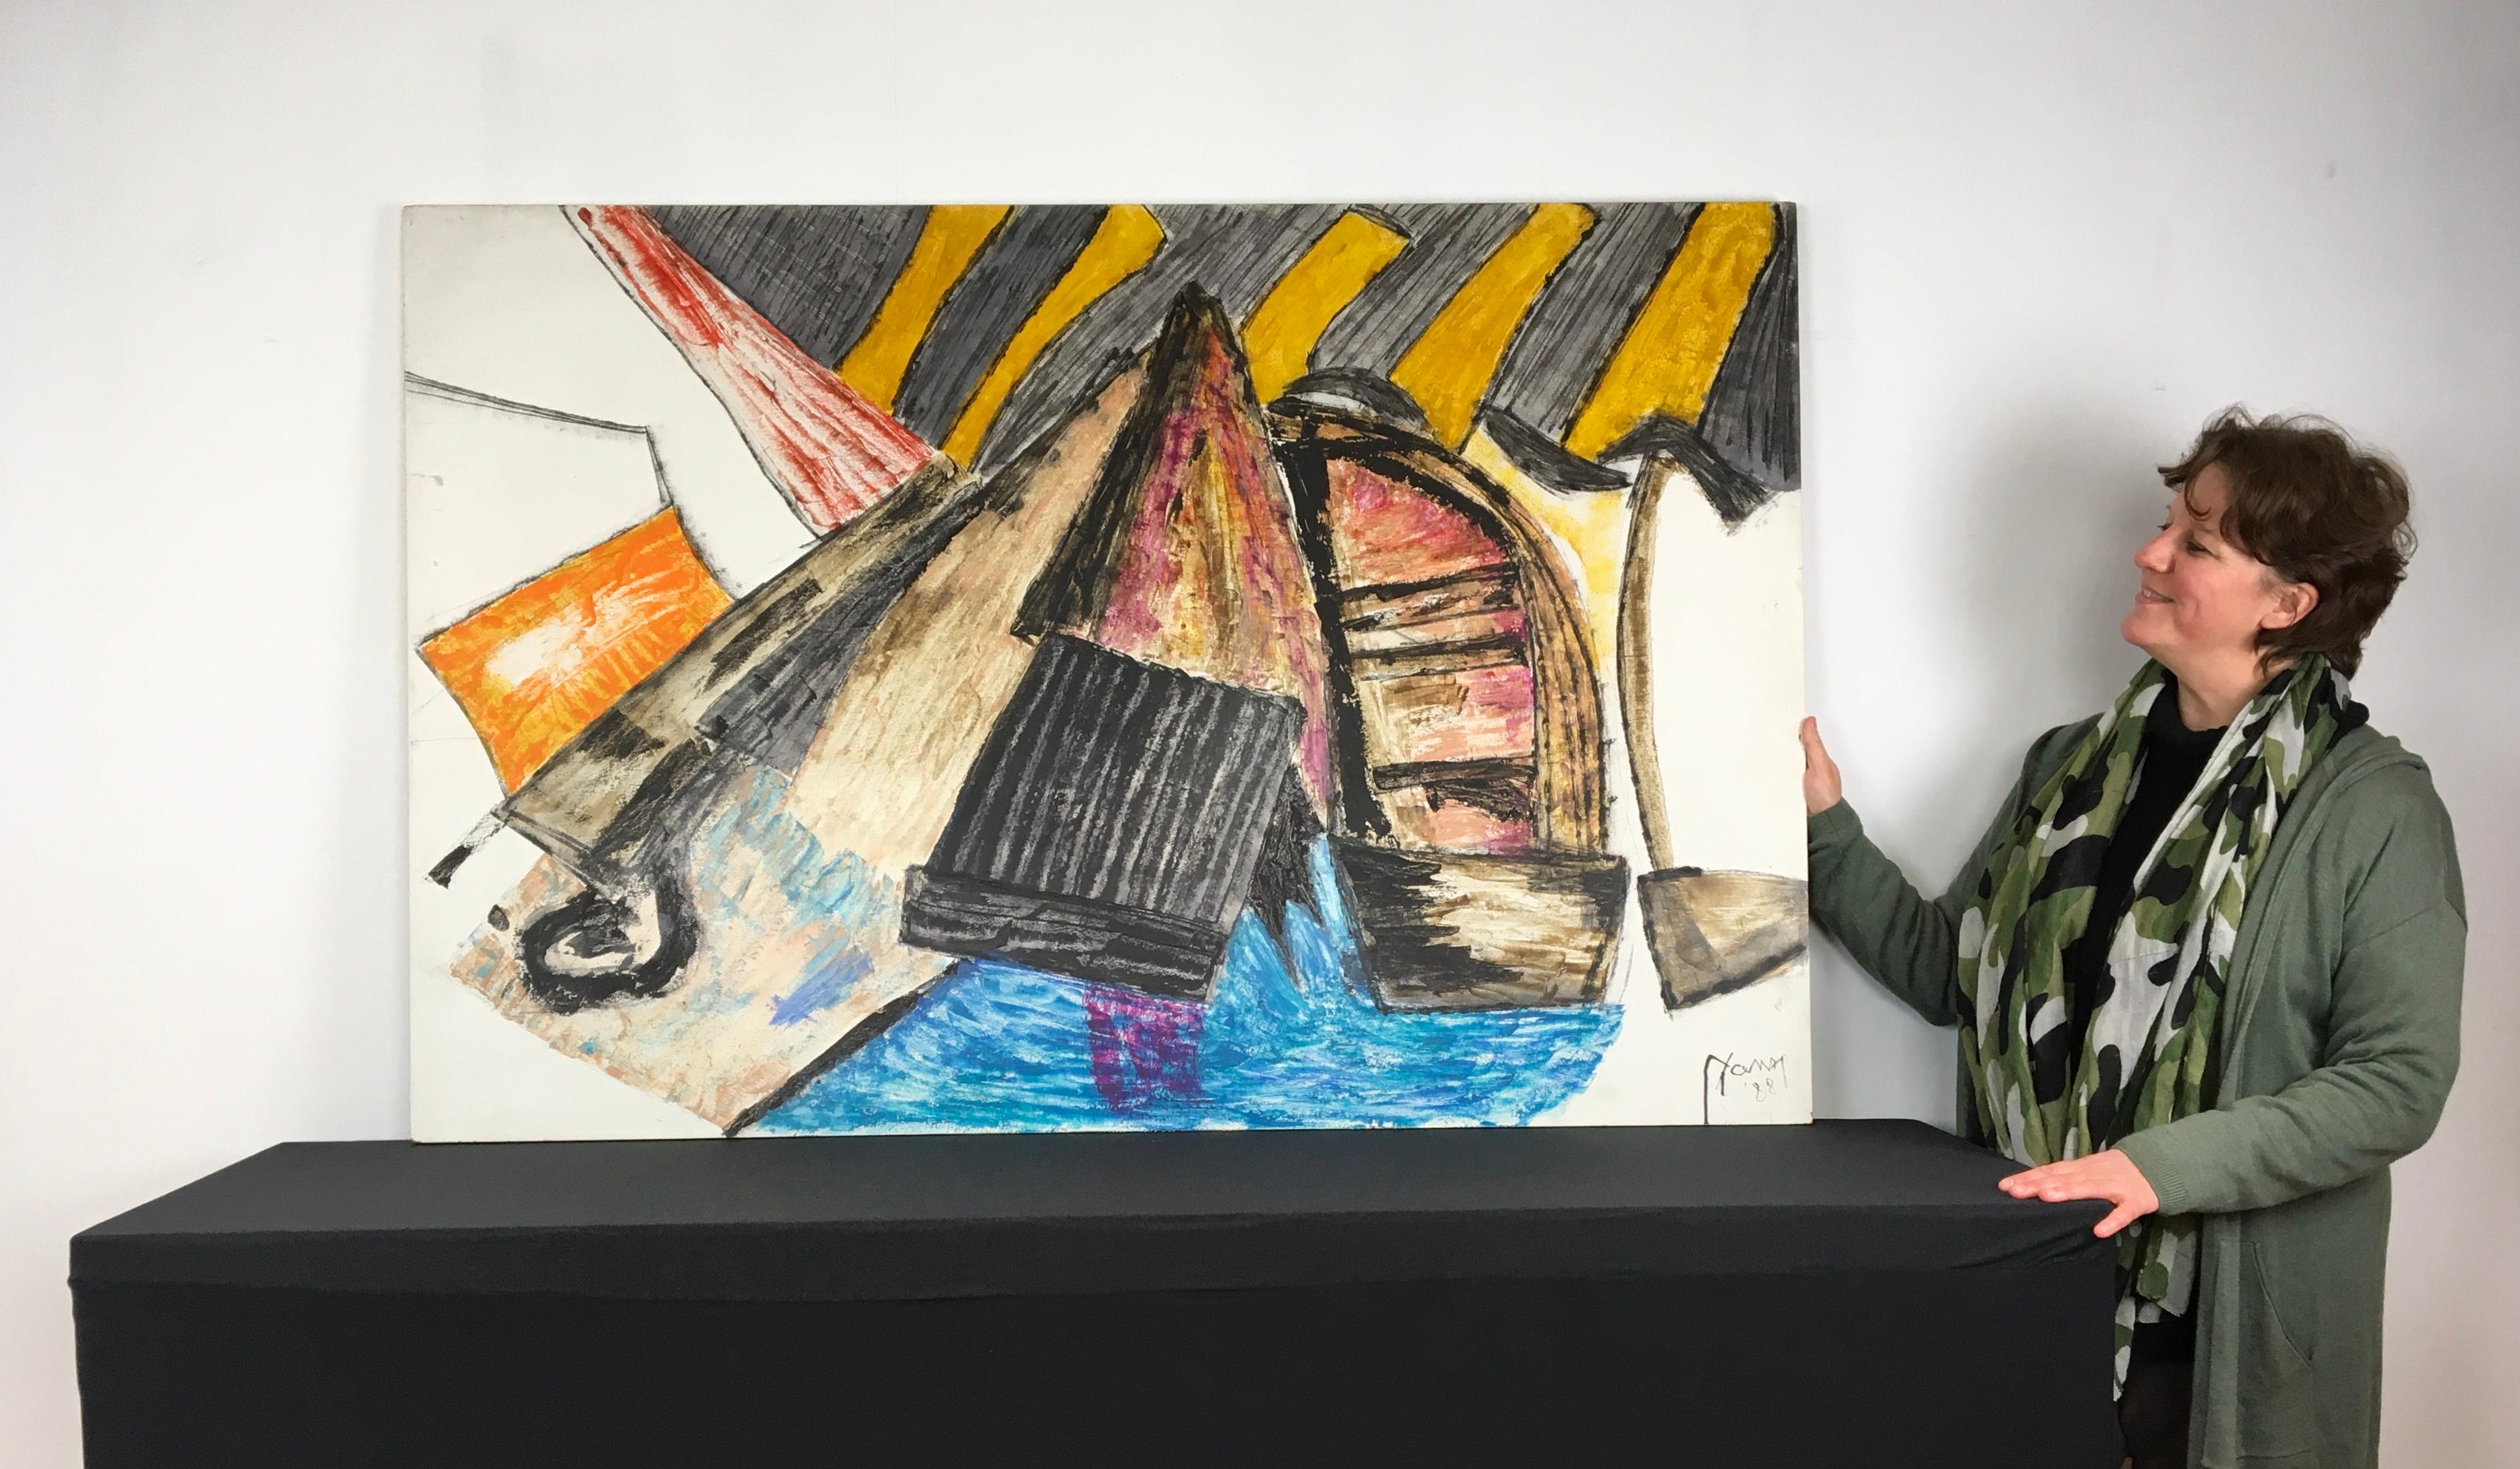 Abstract painted artwork with boats by the Antwerp artist Yann. 
This very expressive and colorful - polychrome work on wood dates from 1988 and was signed by him.
You can see boats - sailboats - in the water or sea , large waves - sunrays etc